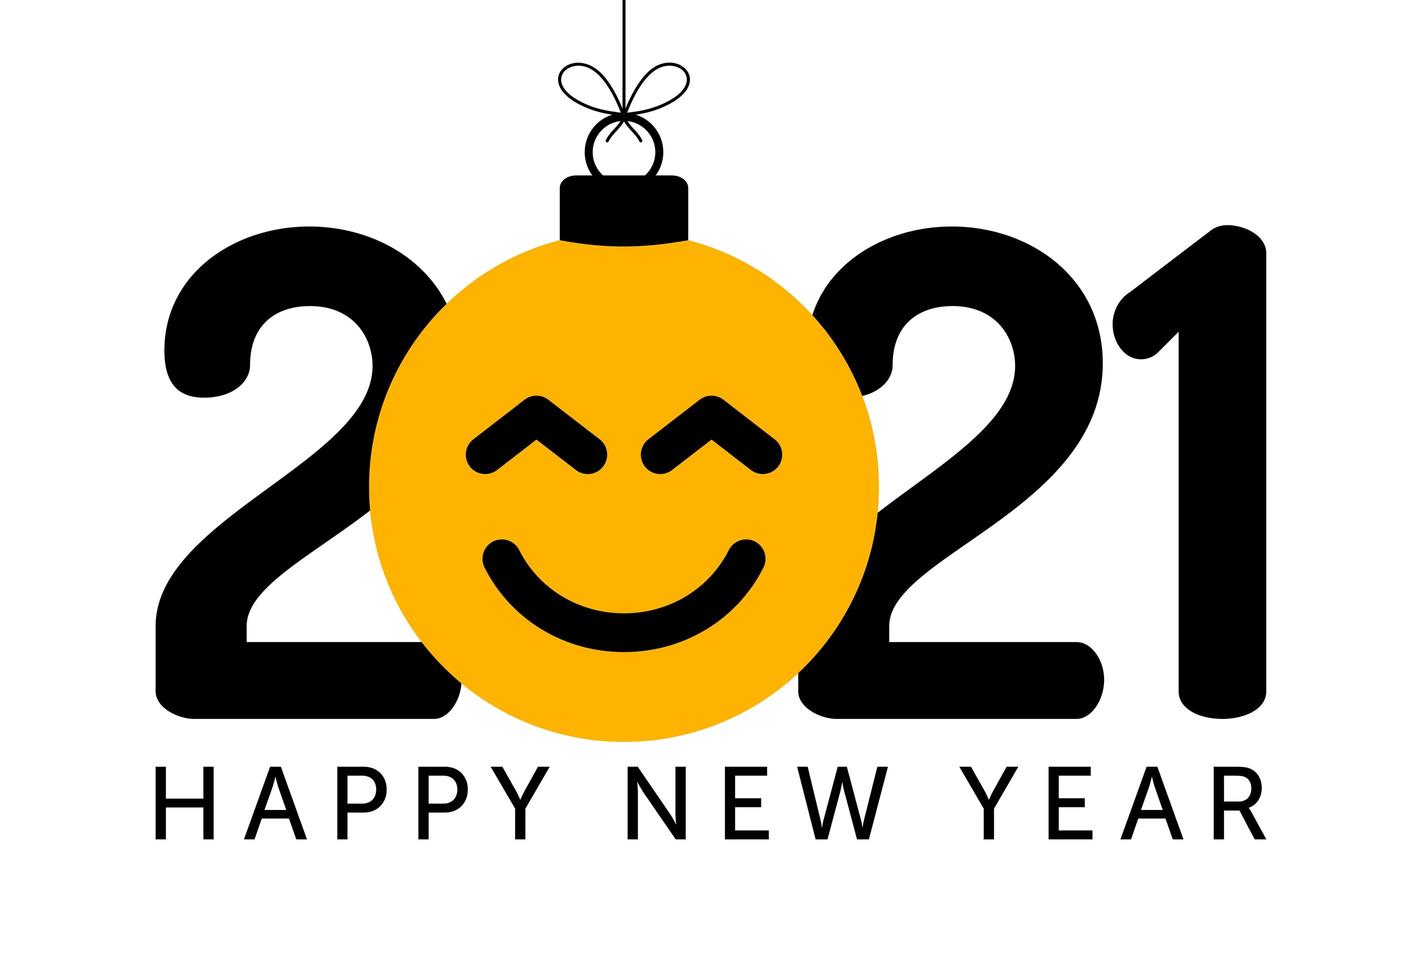 2021 new year greeting with smiling emoji face ornament vector